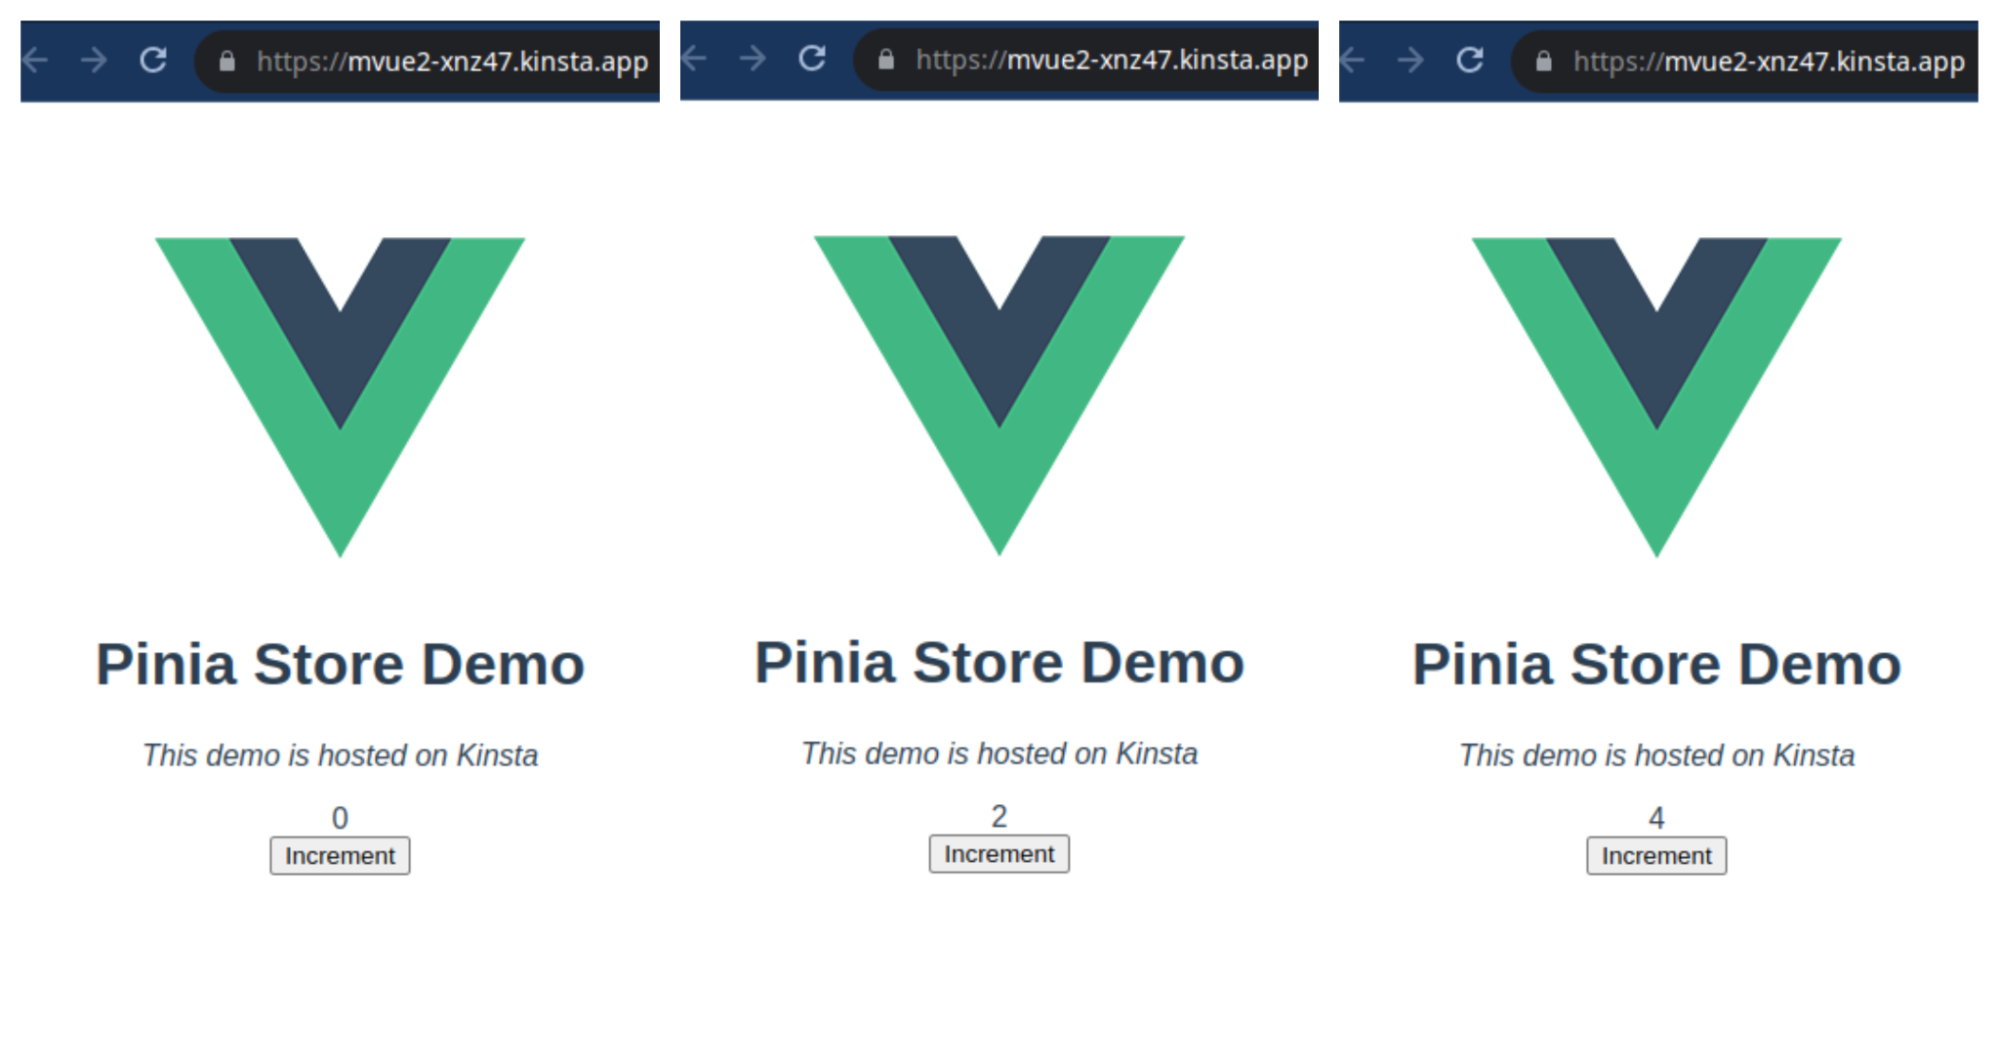 Screenshot of the Pinia Store Demo landing page in different increments: 0, 2, and 4.